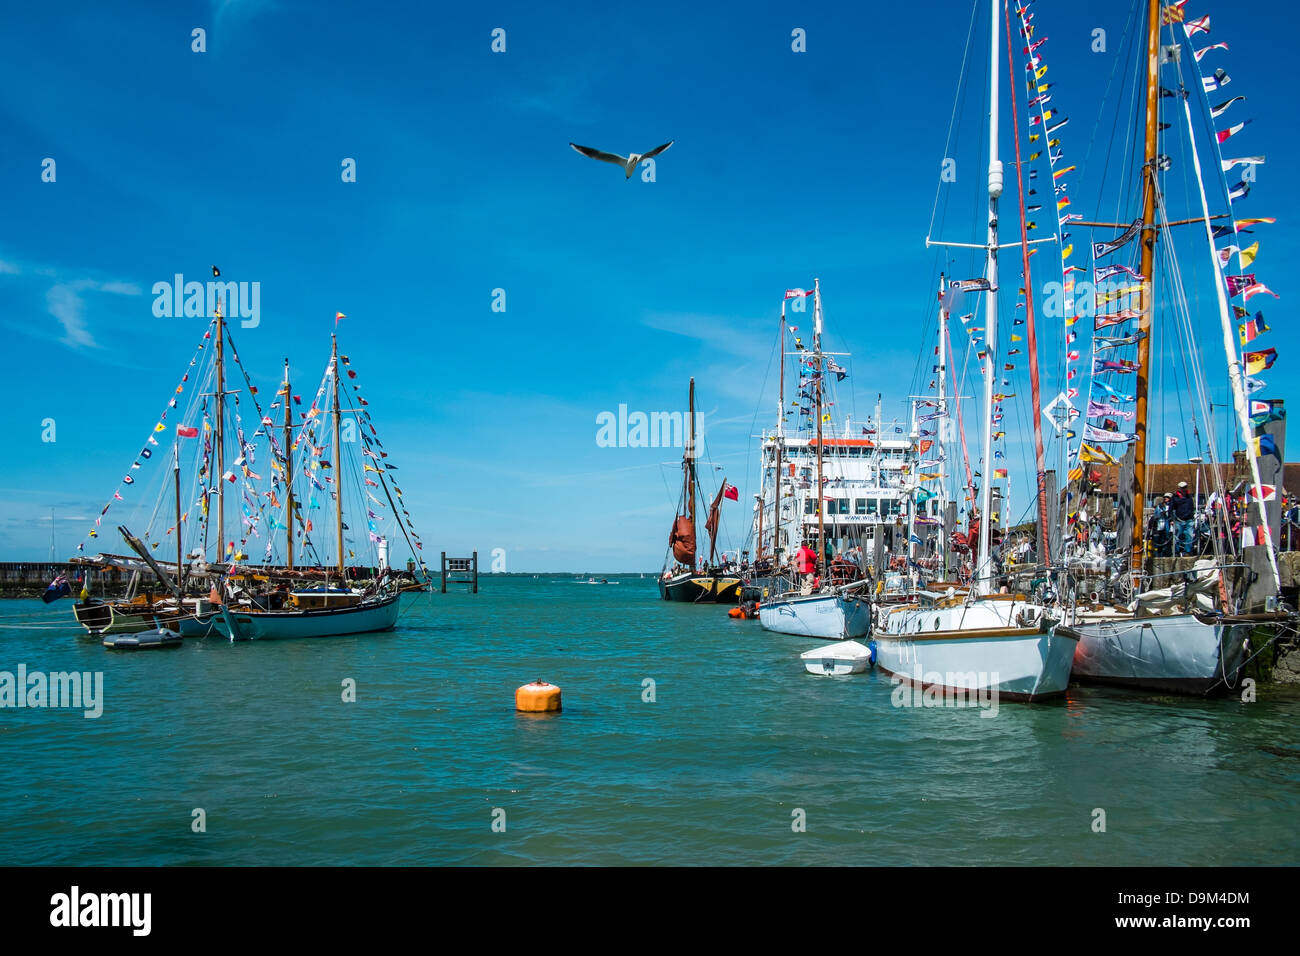 Various vessels in the harbour at Yarmouth, Isle of Wight, England during the Old Gaffers Festival. Stock Photo